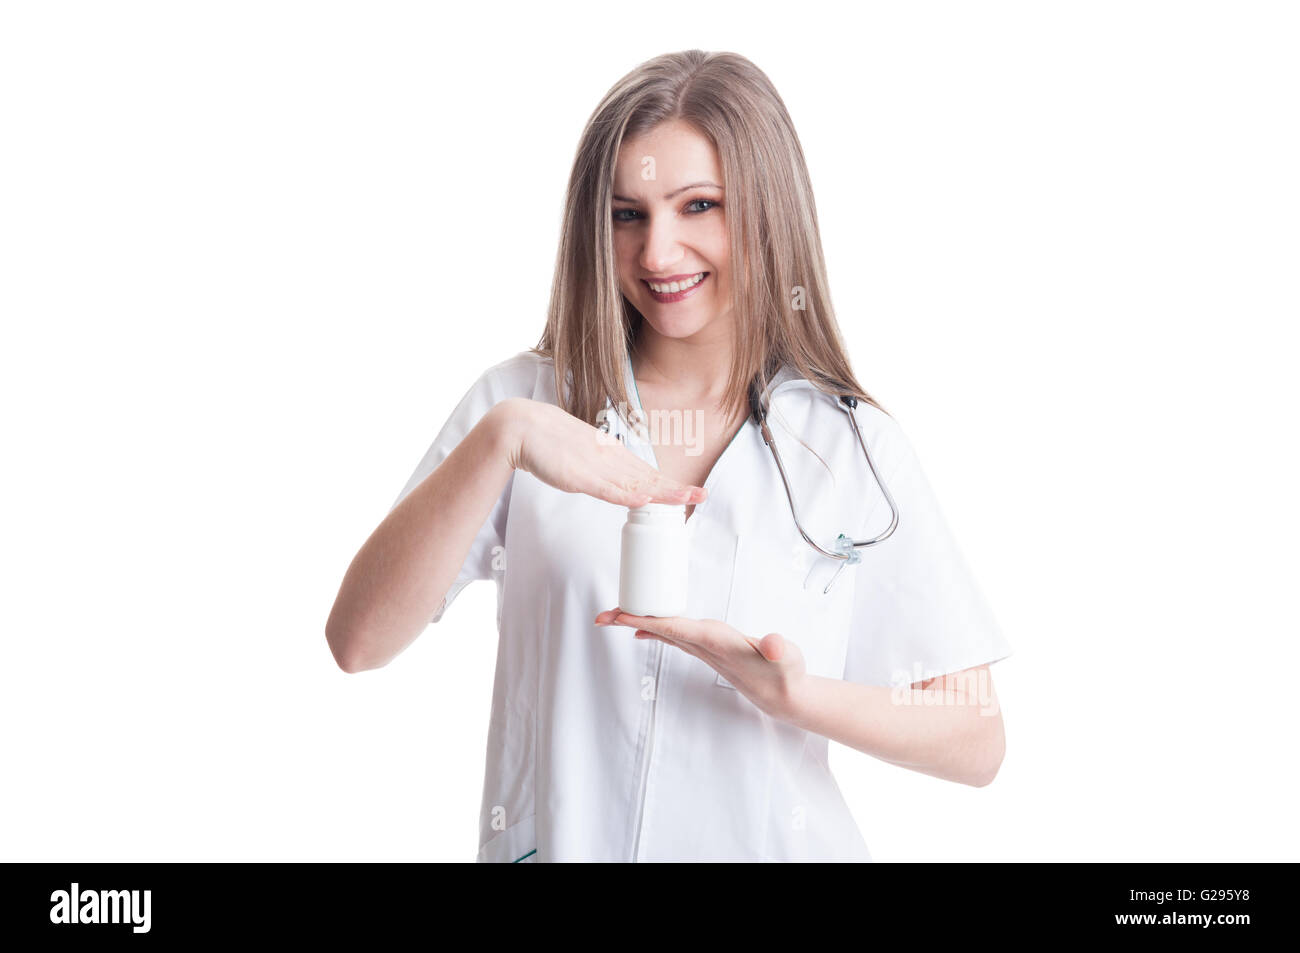 Young female doctor holding a white unlabeled bottle of medicine or pills Stock Photo